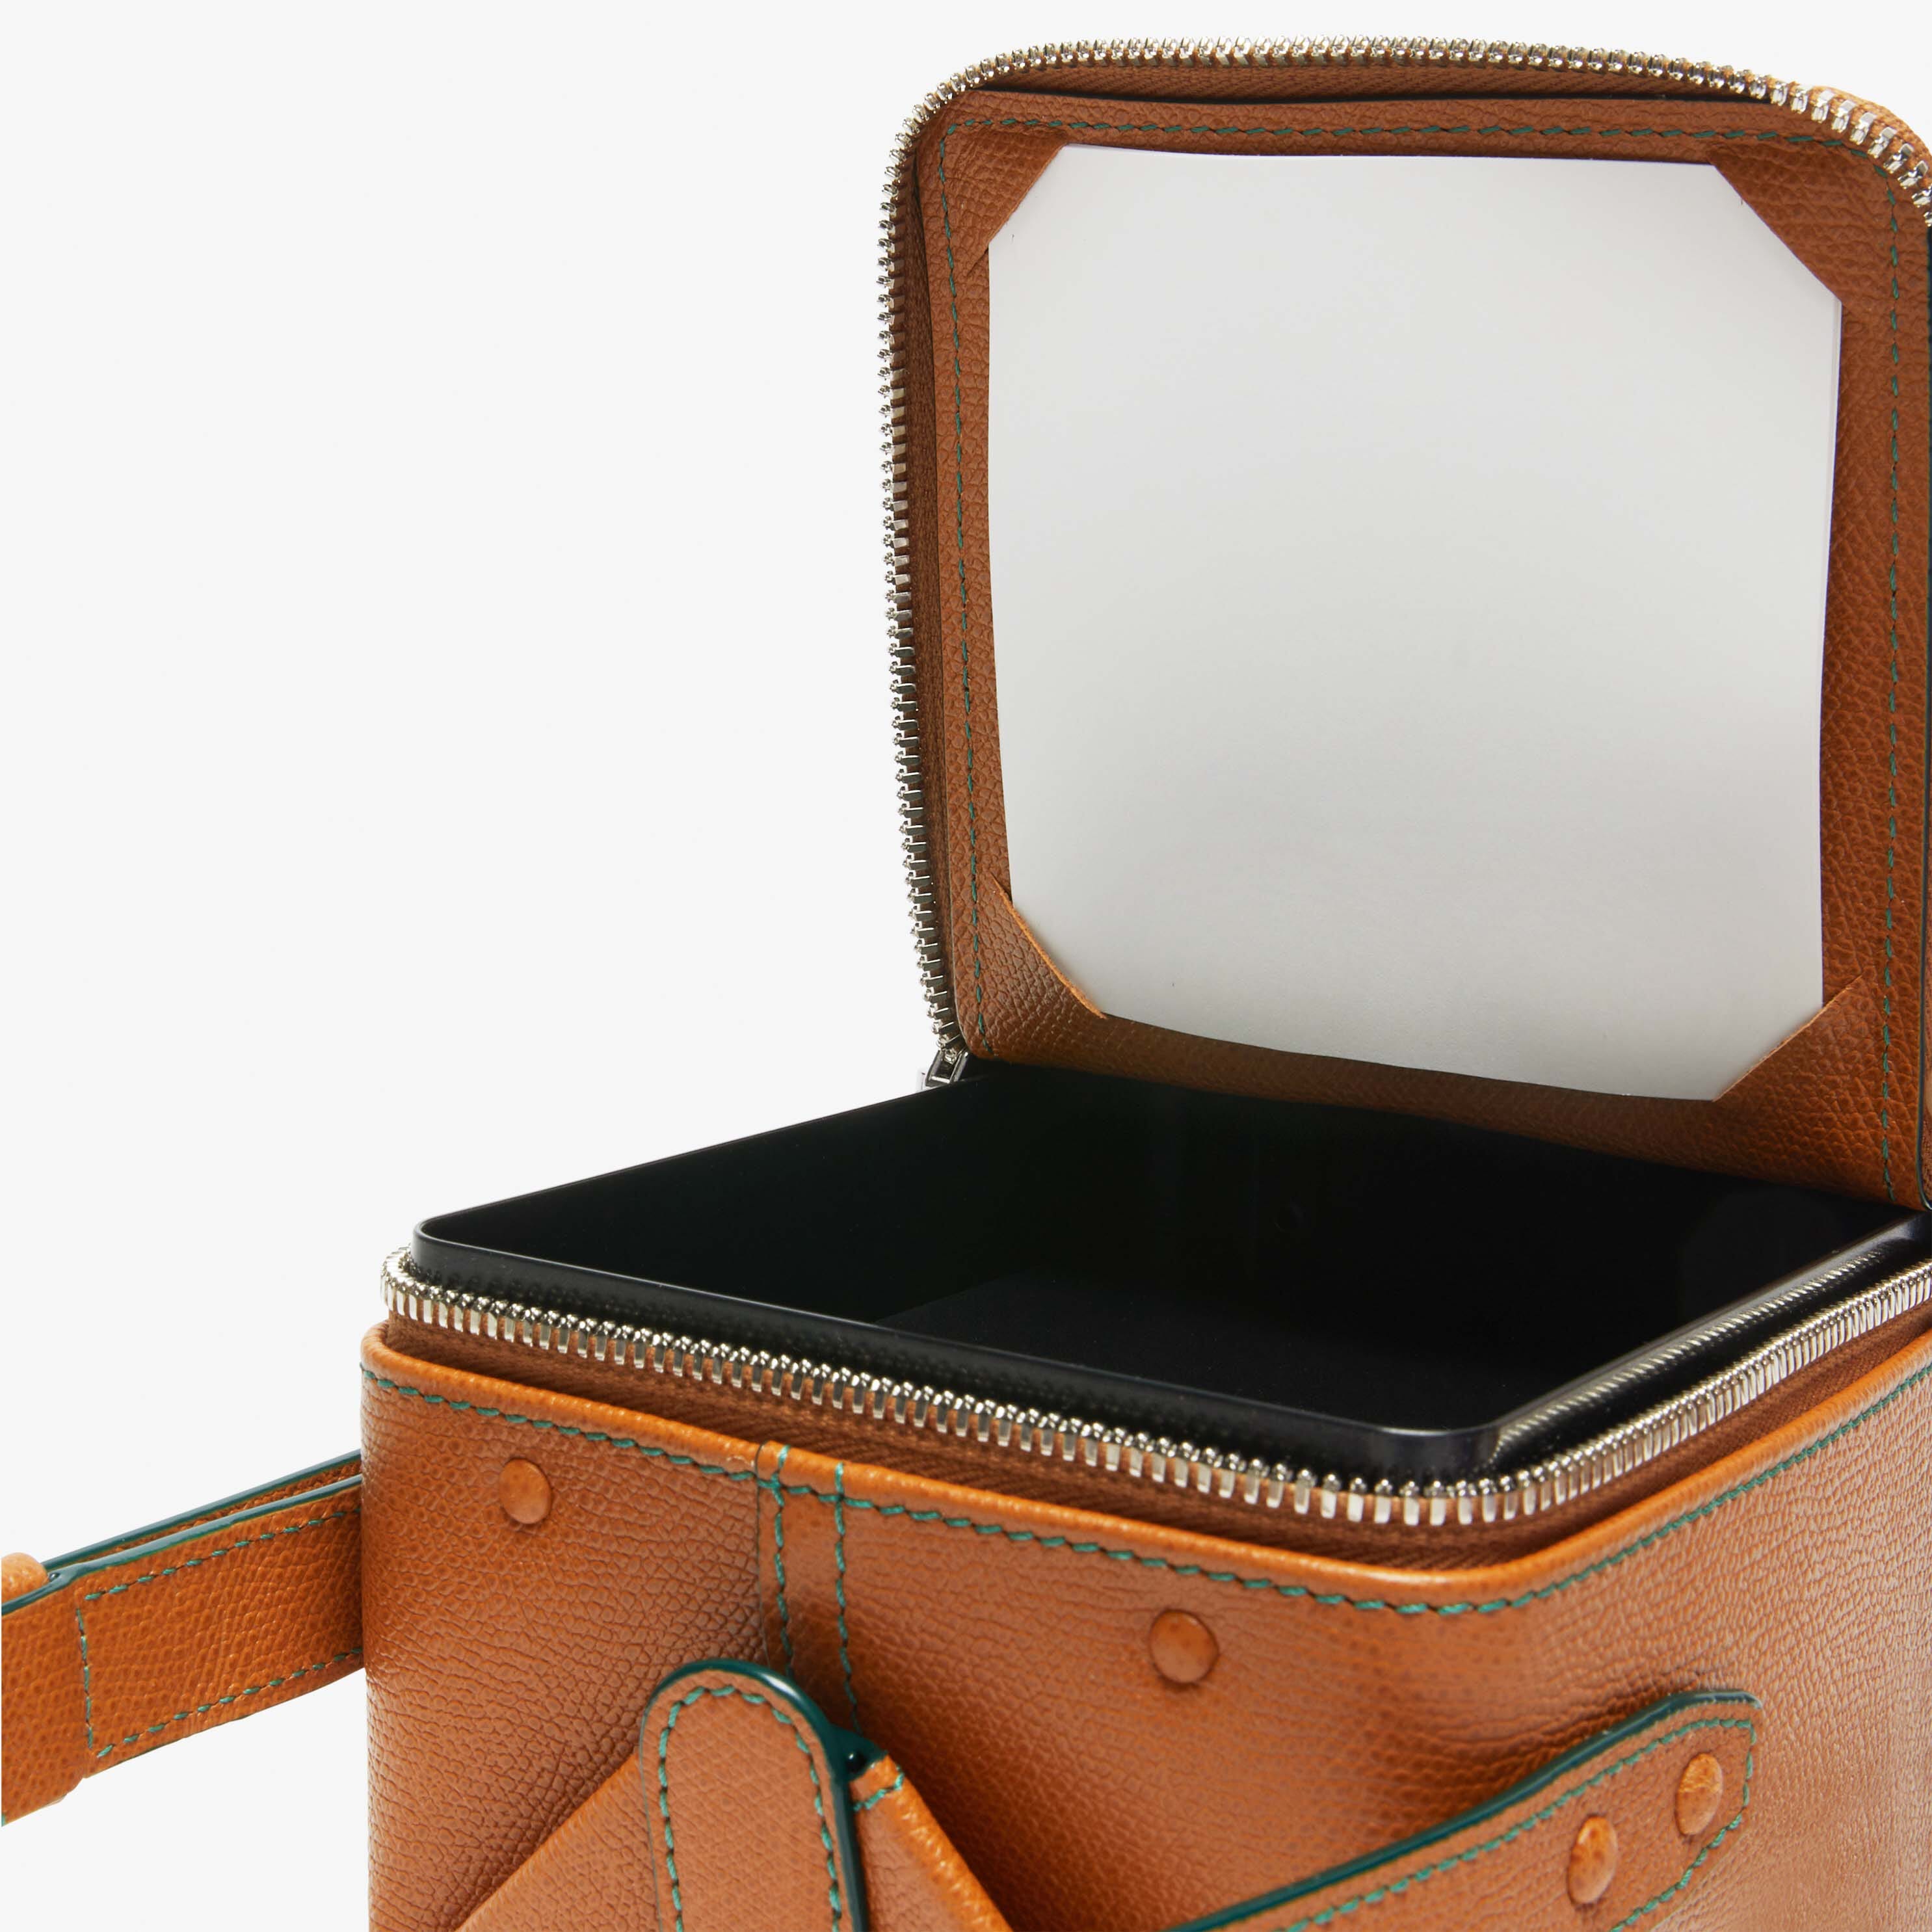 Brown Leather Mini top handle bag | Valextra Tric Trac